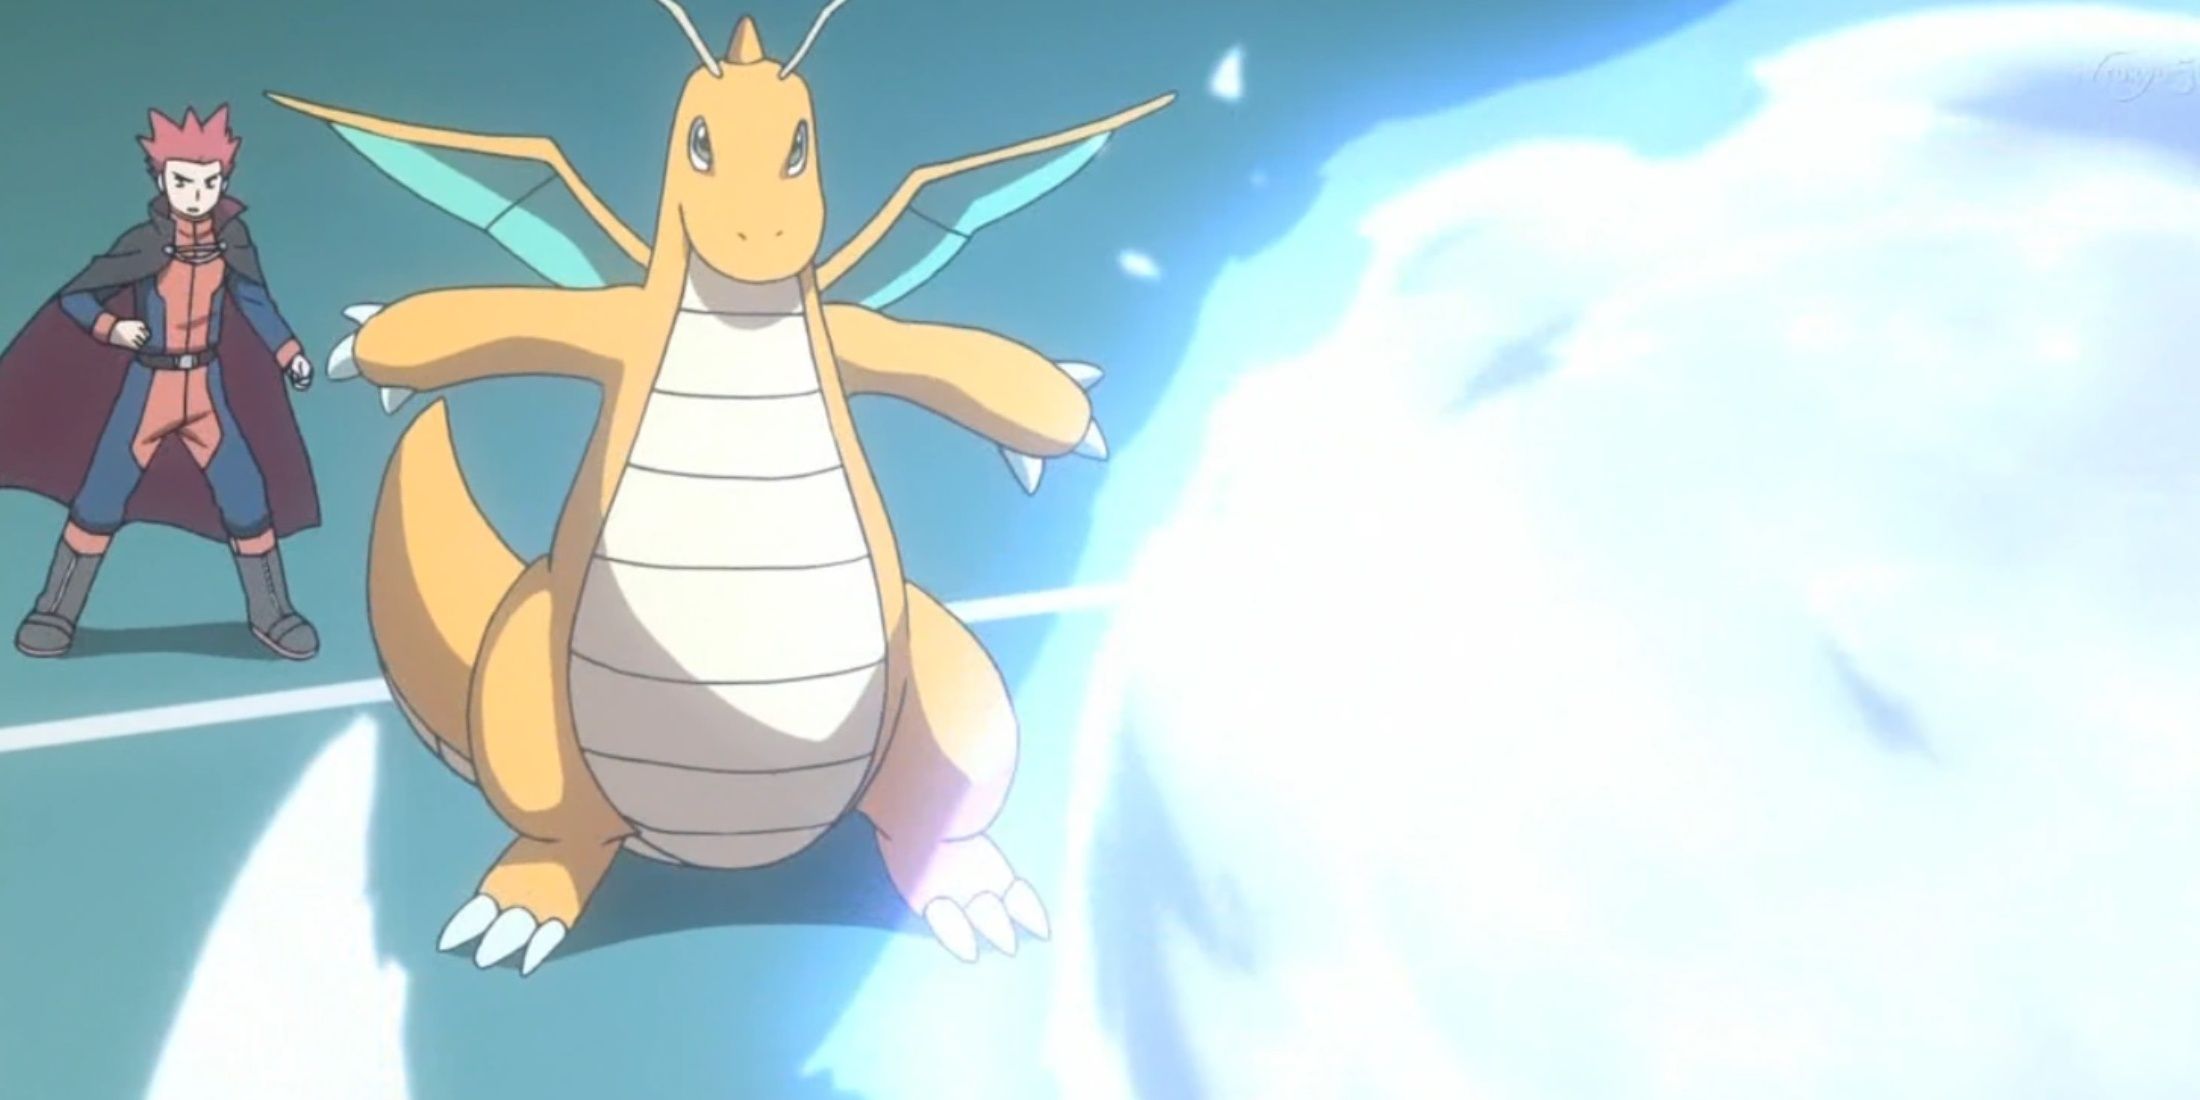 Pokemon Duos Lance and Dragonite as it prepares to dodge.